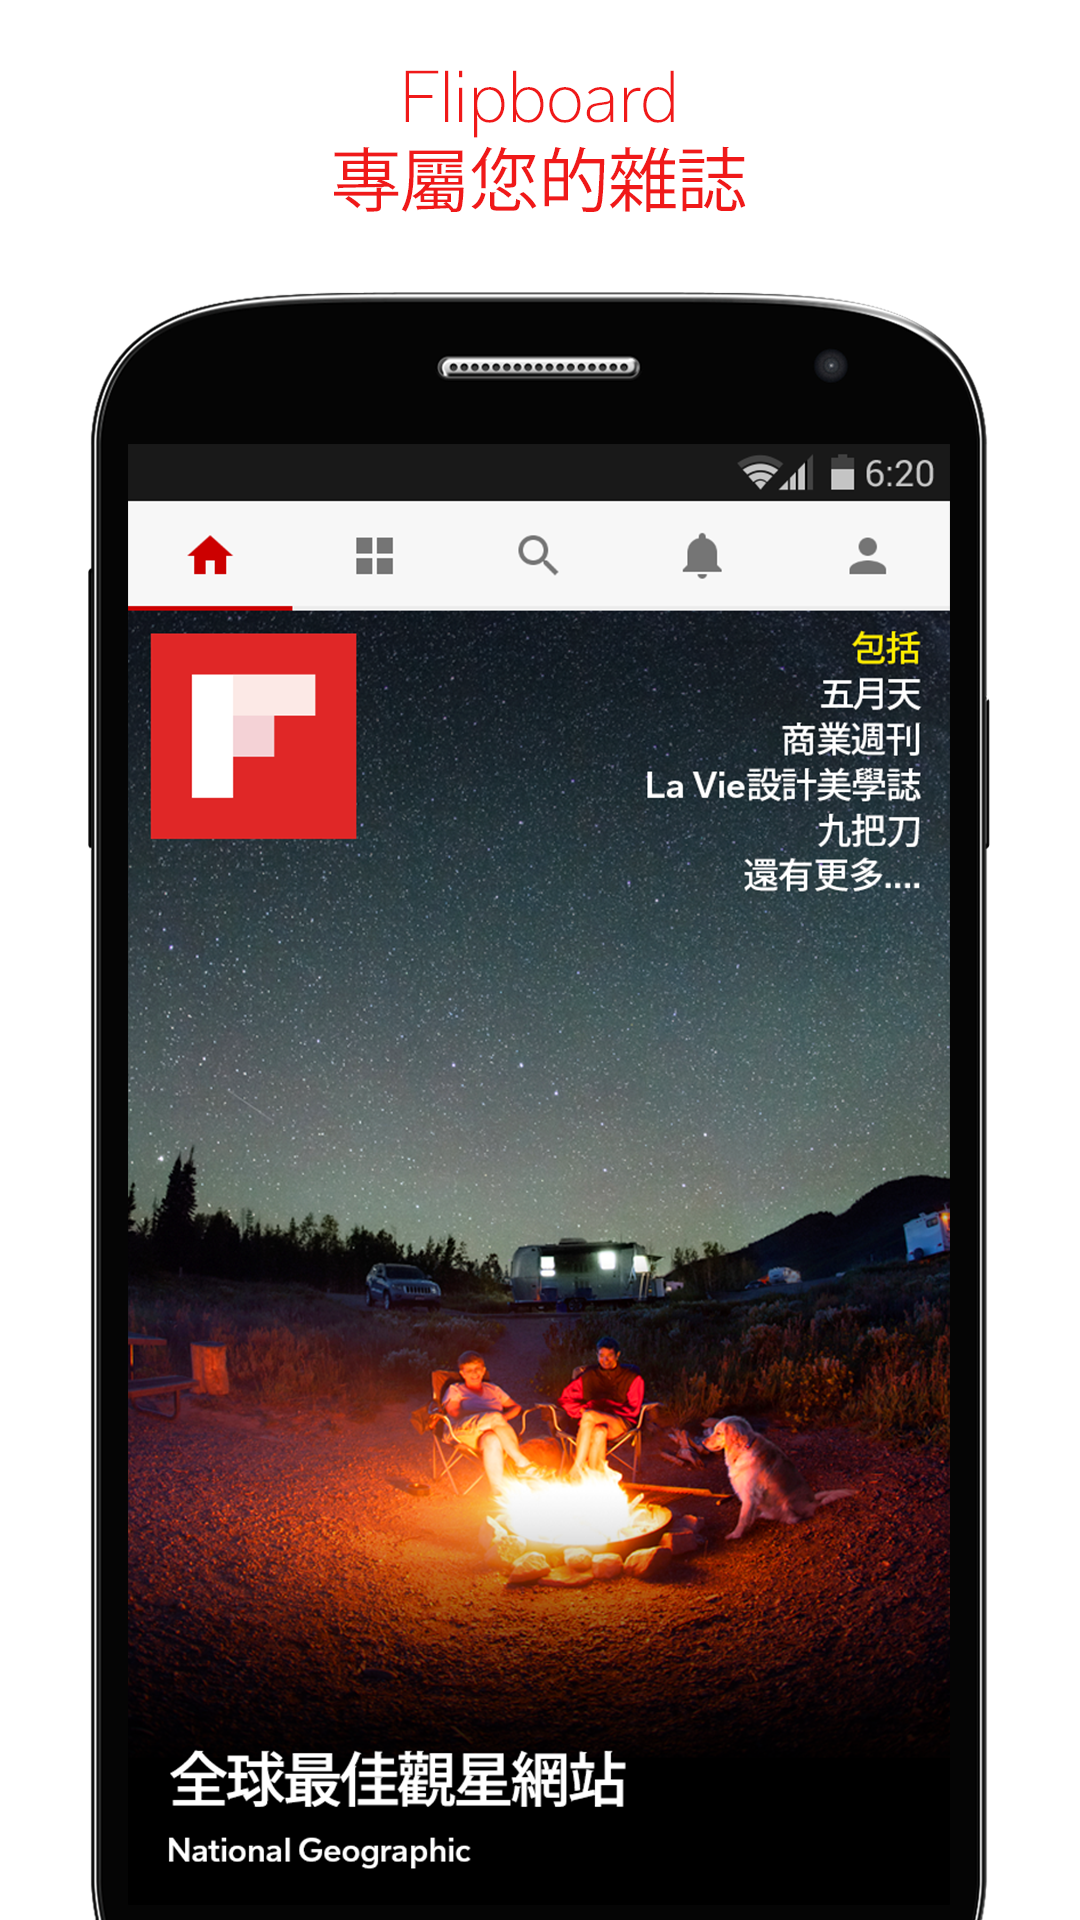 Android application Flipboard - Latest News, Top Stories & Lifestyle screenshort